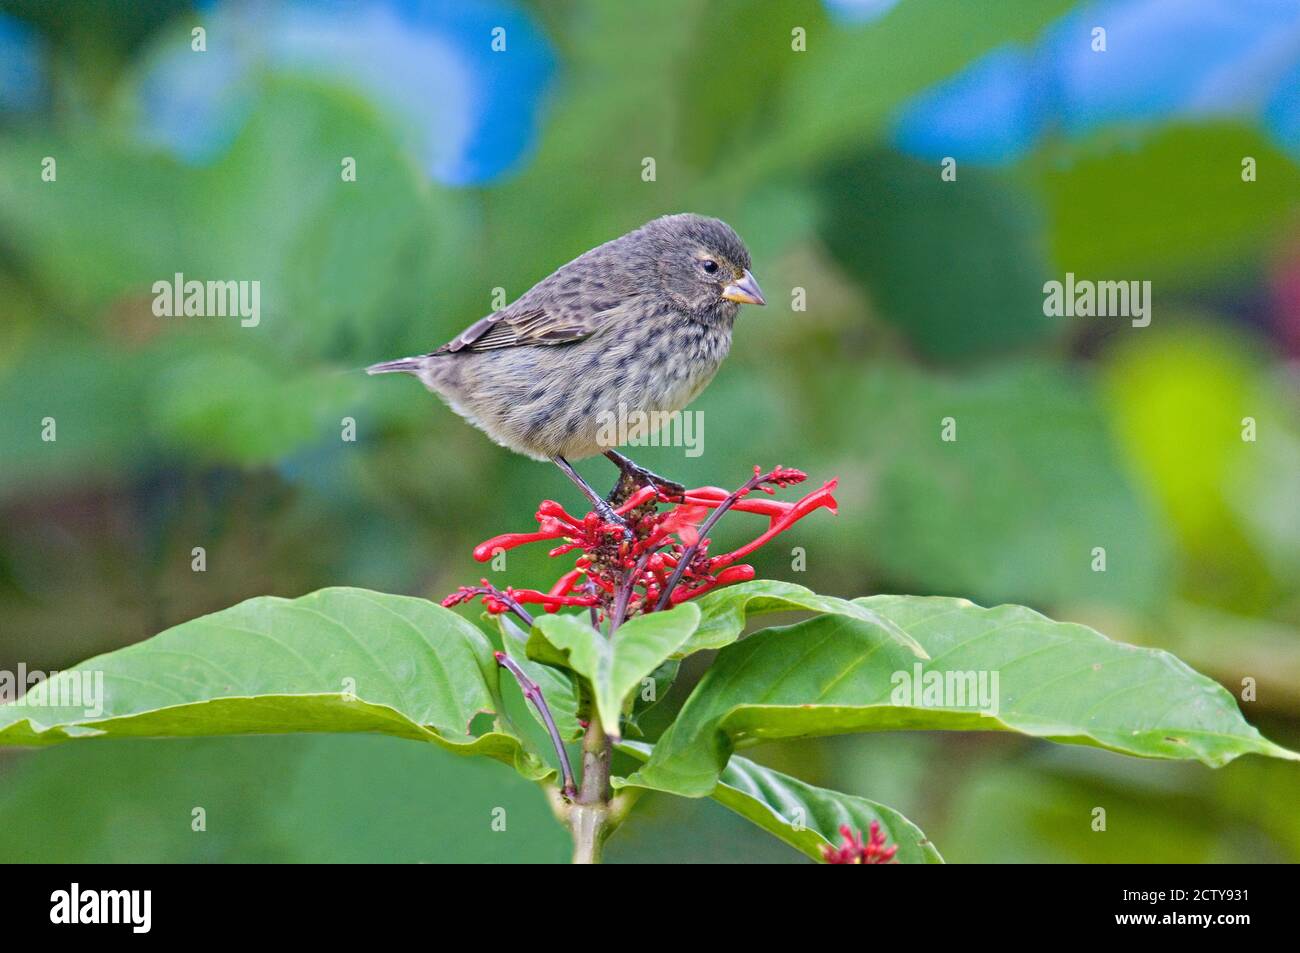 Close-up of a Small Ground-finch (Geospiza fuliginosa) perching on a plant, Galapagos Islands, Ecuador Stock Photo